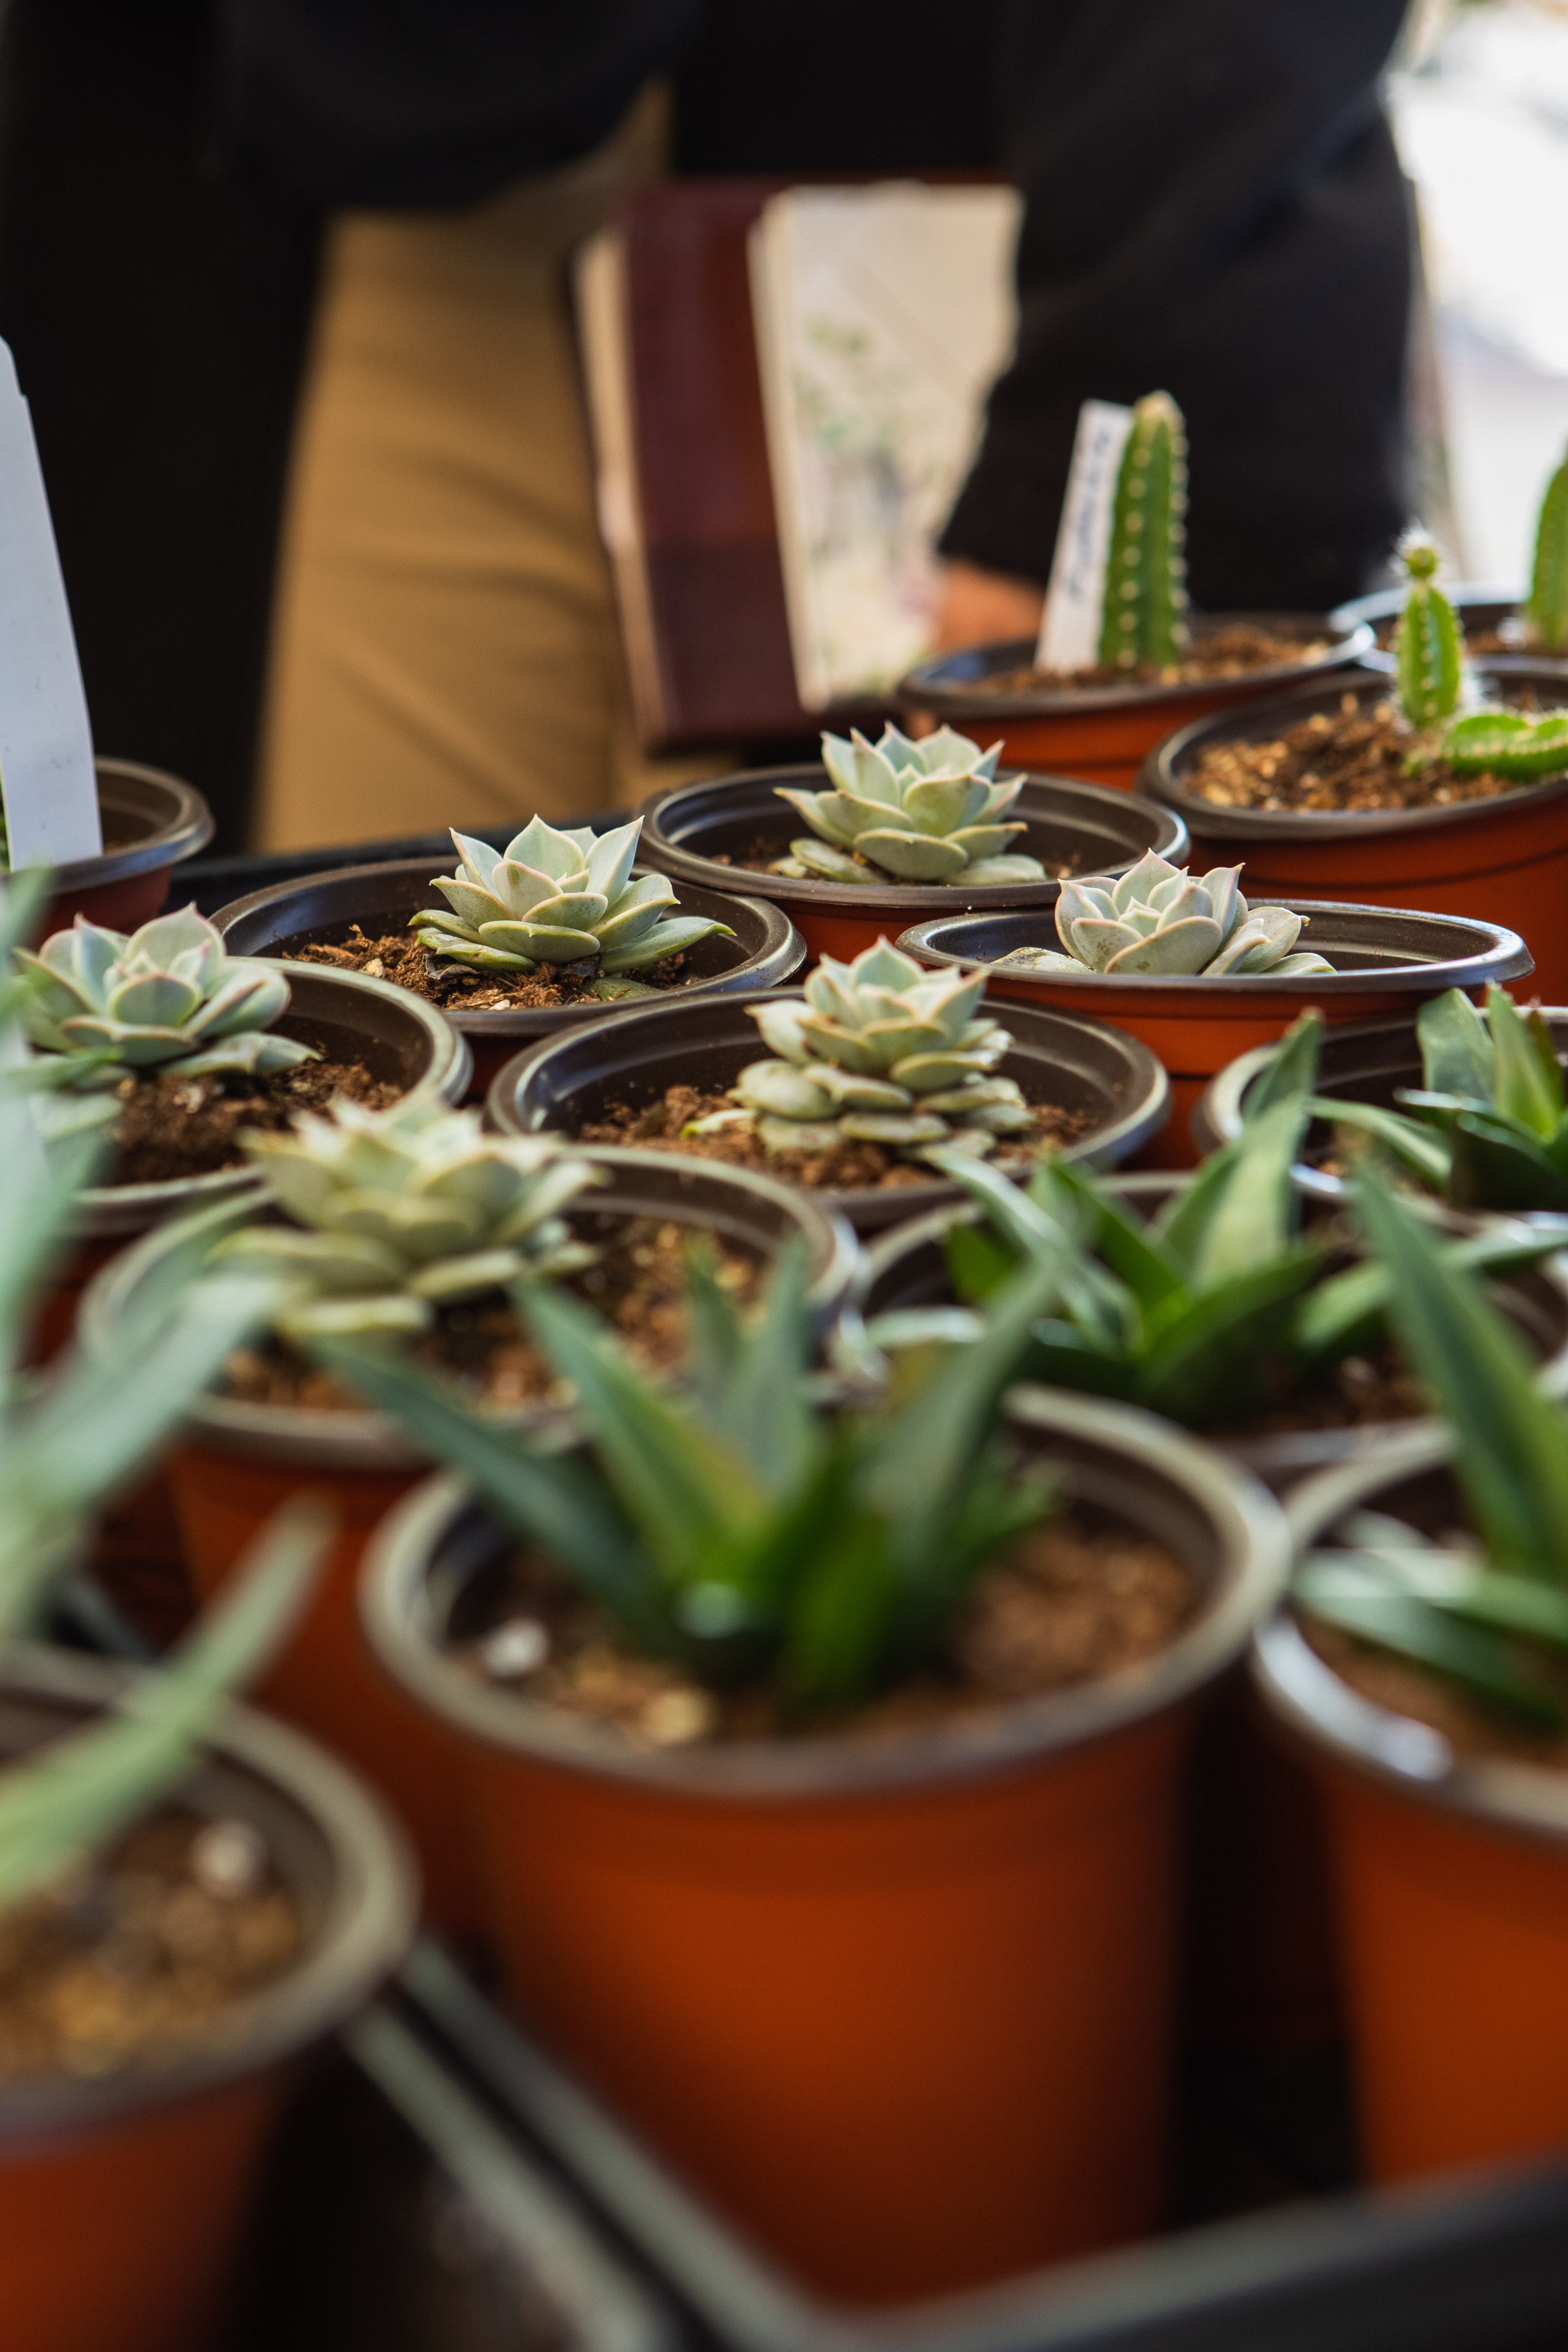 The Collegiate Biology Association hosted its annual succulent sale outside the Den (Photo by Bradley Allweil)